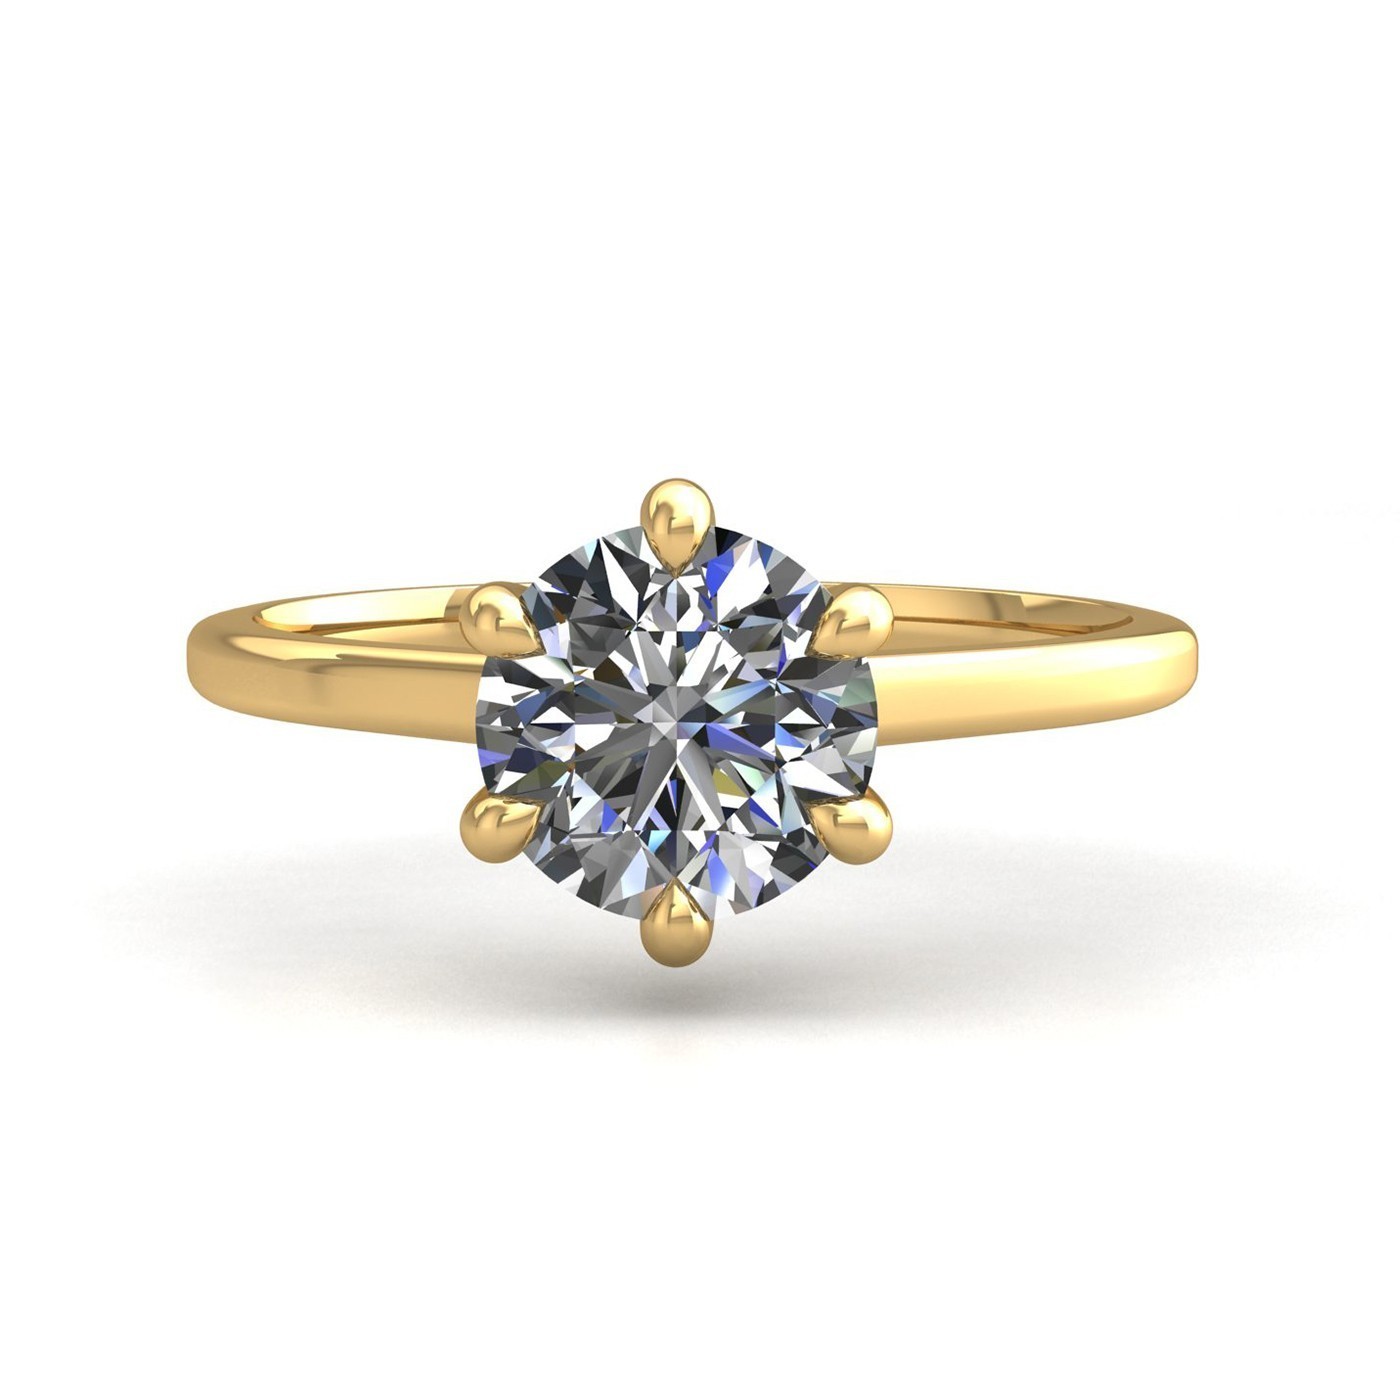 18K YELLOW GOLD 6 PRONGS SOLITAIRE ROUND CUT DIAMOND ENGAGEMENT RING WITH WHISPER THIN BAND